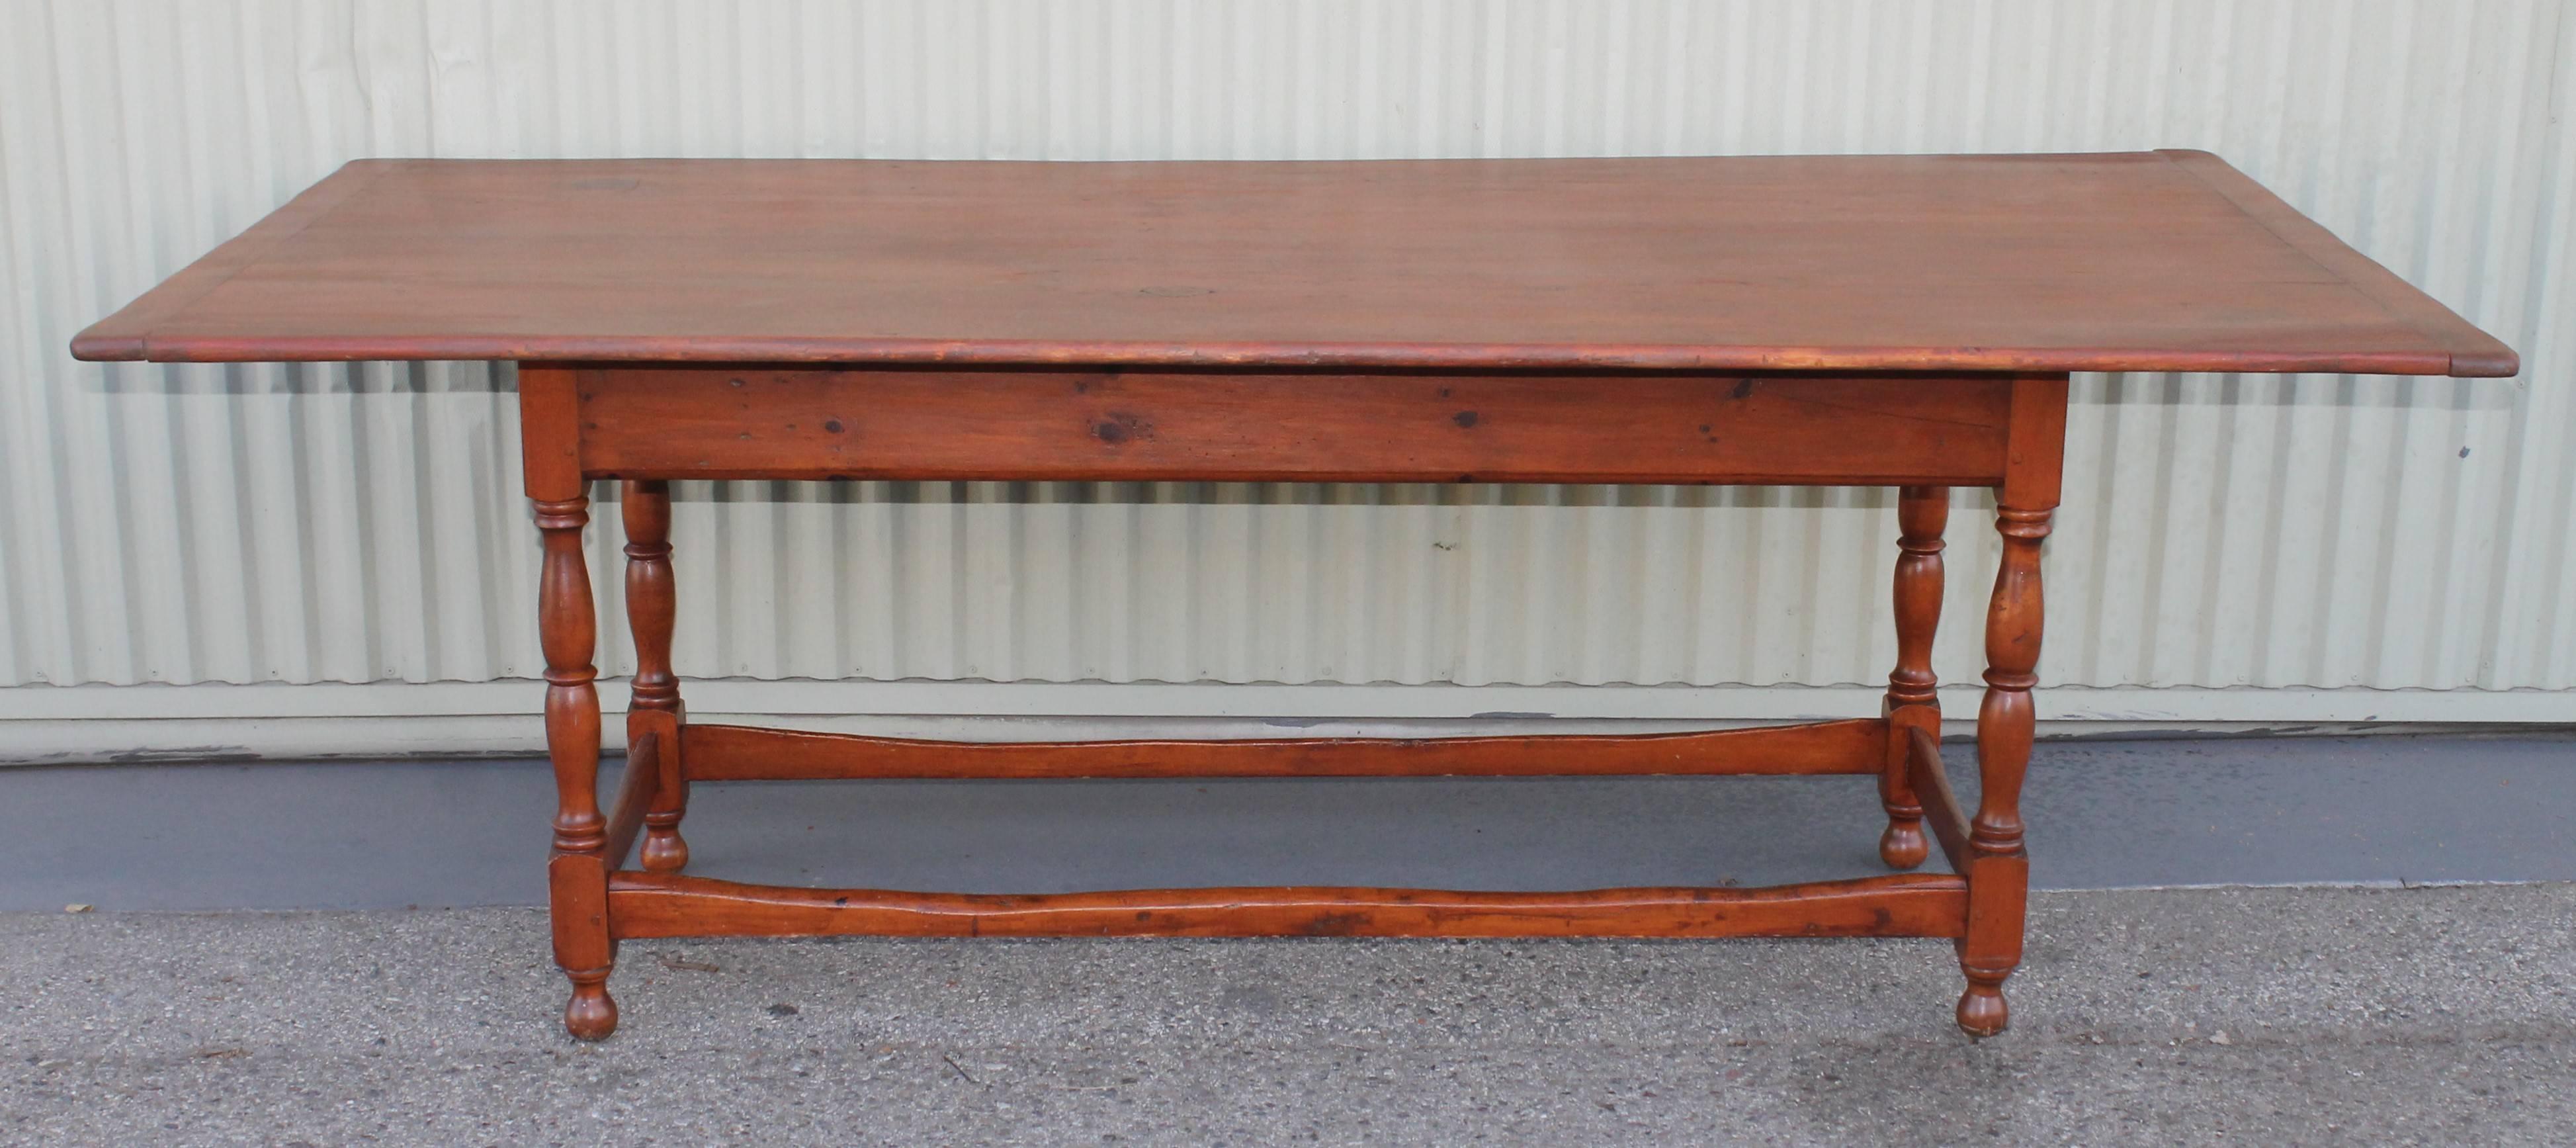 This fine country dining table was found in the state of Maine and has a wonderful aged patina. The top is a slightly painted and scrub bread board ends top. The base has a natural old stained surface and worn stretcher base. The table has wood pegs